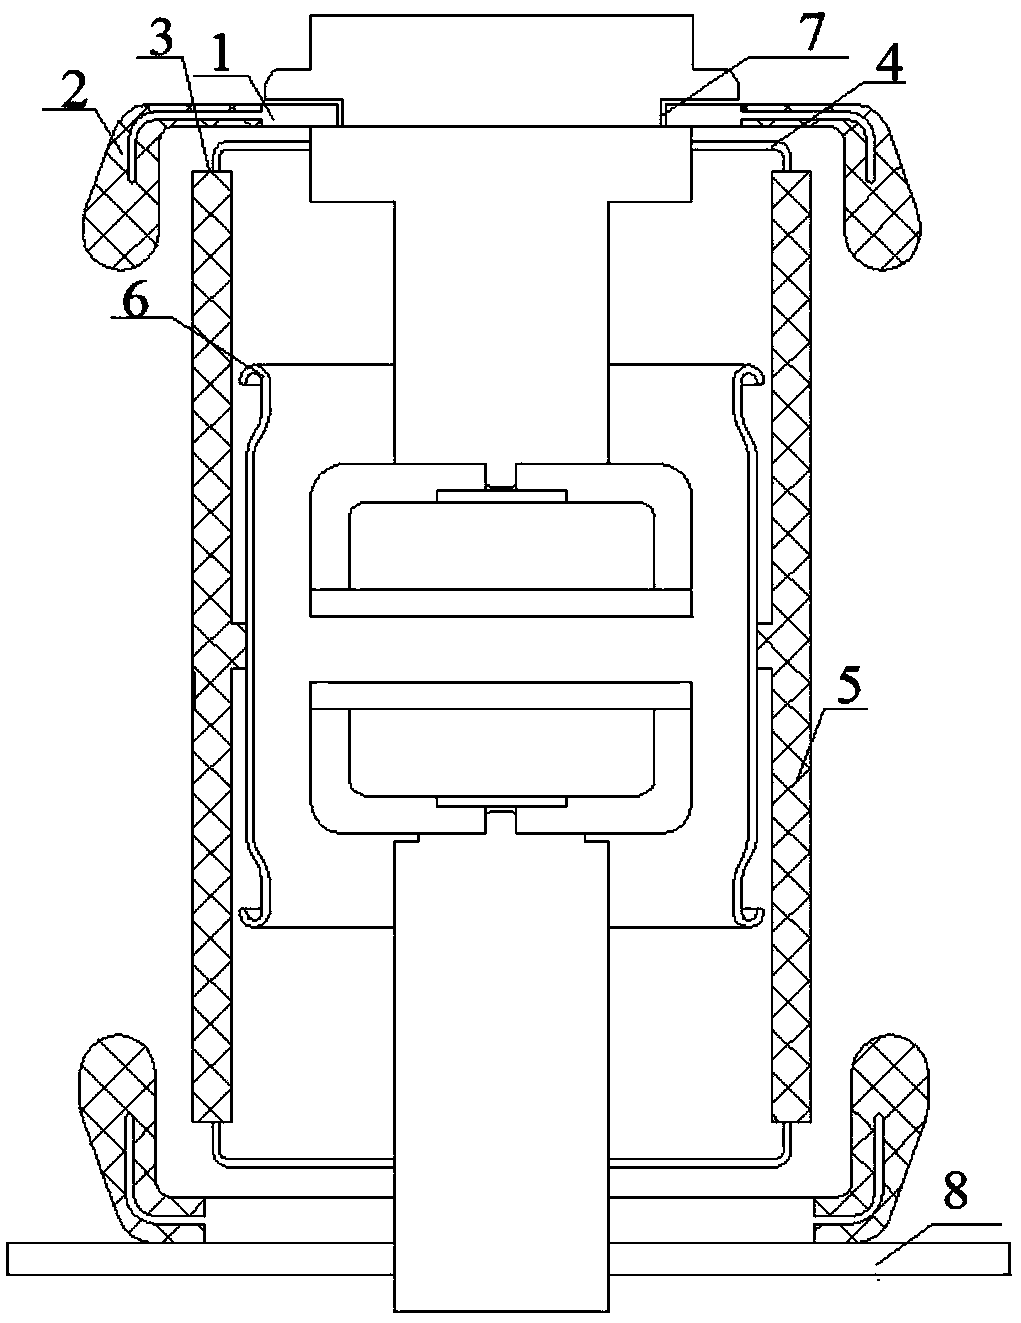 A vacuum interrupter with composite shielding structure